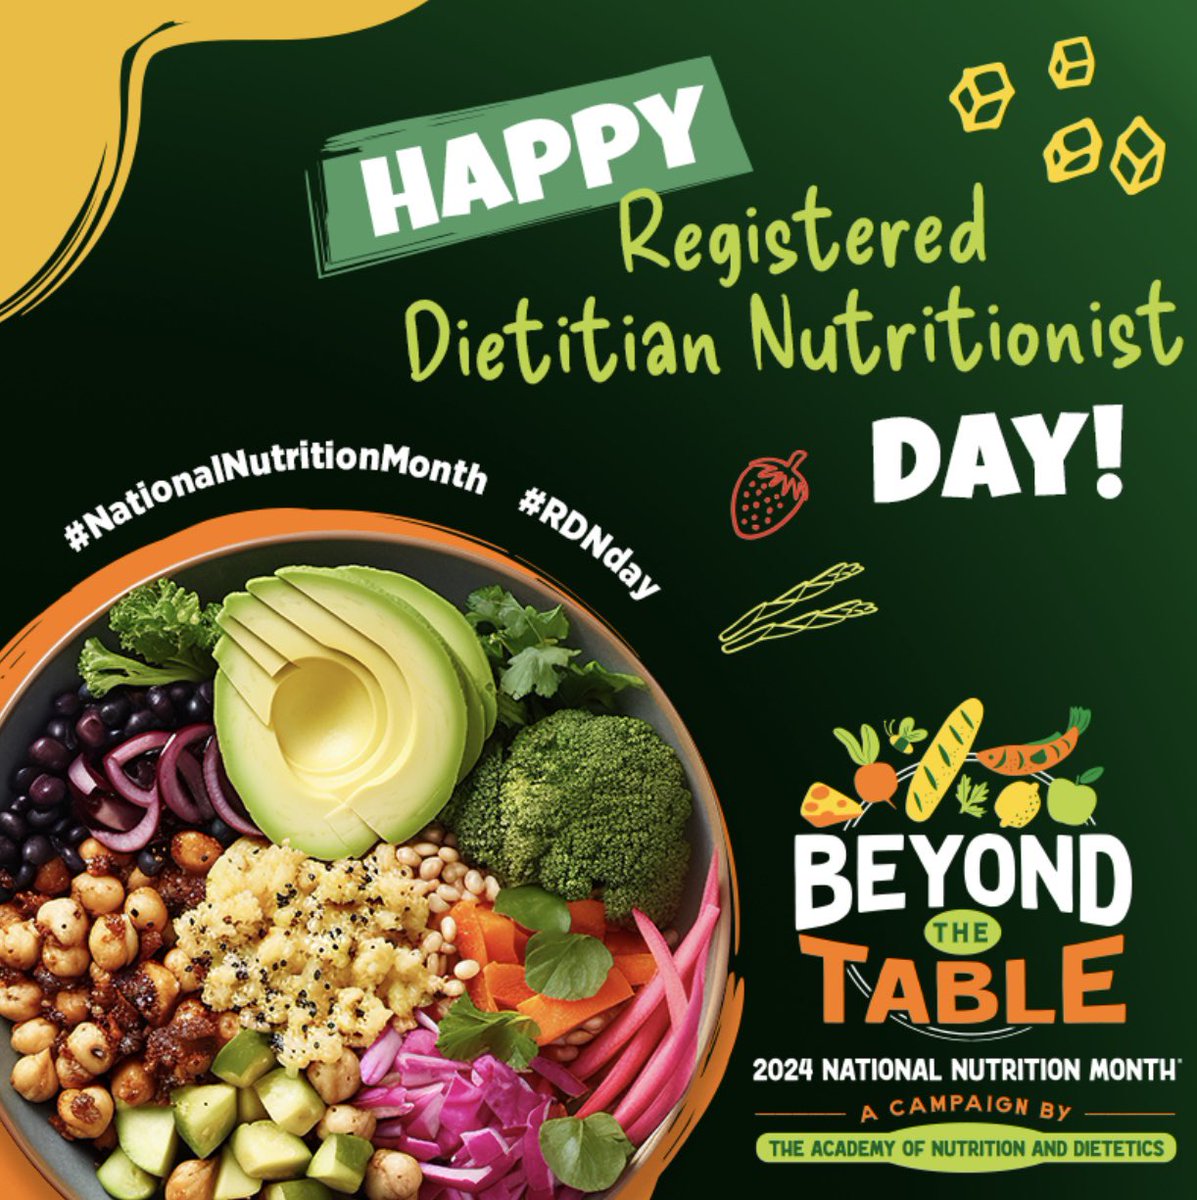 Happy RDN Day!
Registered Dietitian Nutritionist Day is March 13! Let's celebrate and thank those who help Americans and people around the world live healthier lives through nutrition: sm.eatright.org/RDNday
#NationalNutritionMonth #RDNday 
#registereddietitian @eatrightPRO